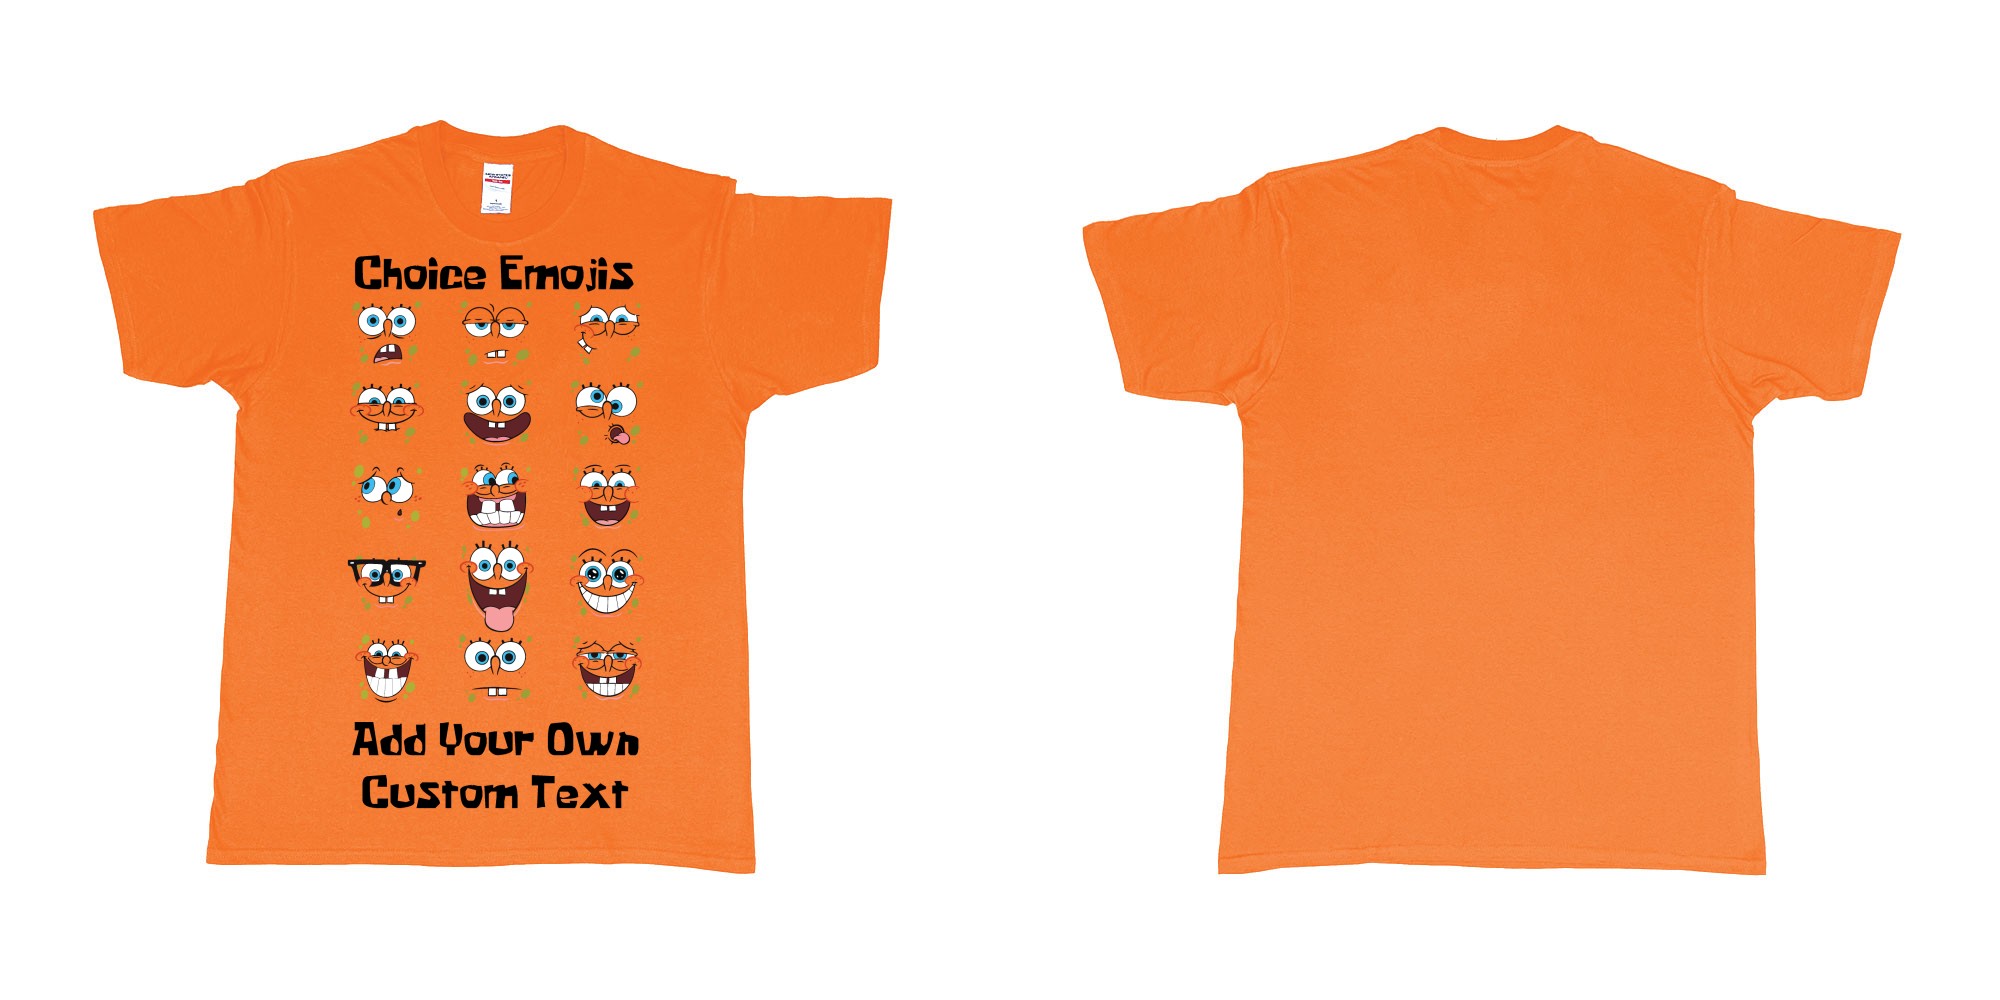 Custom tshirt design spongebob squarepants many faces emojis custum printing in fabric color orange choice your own text made in Bali by The Pirate Way